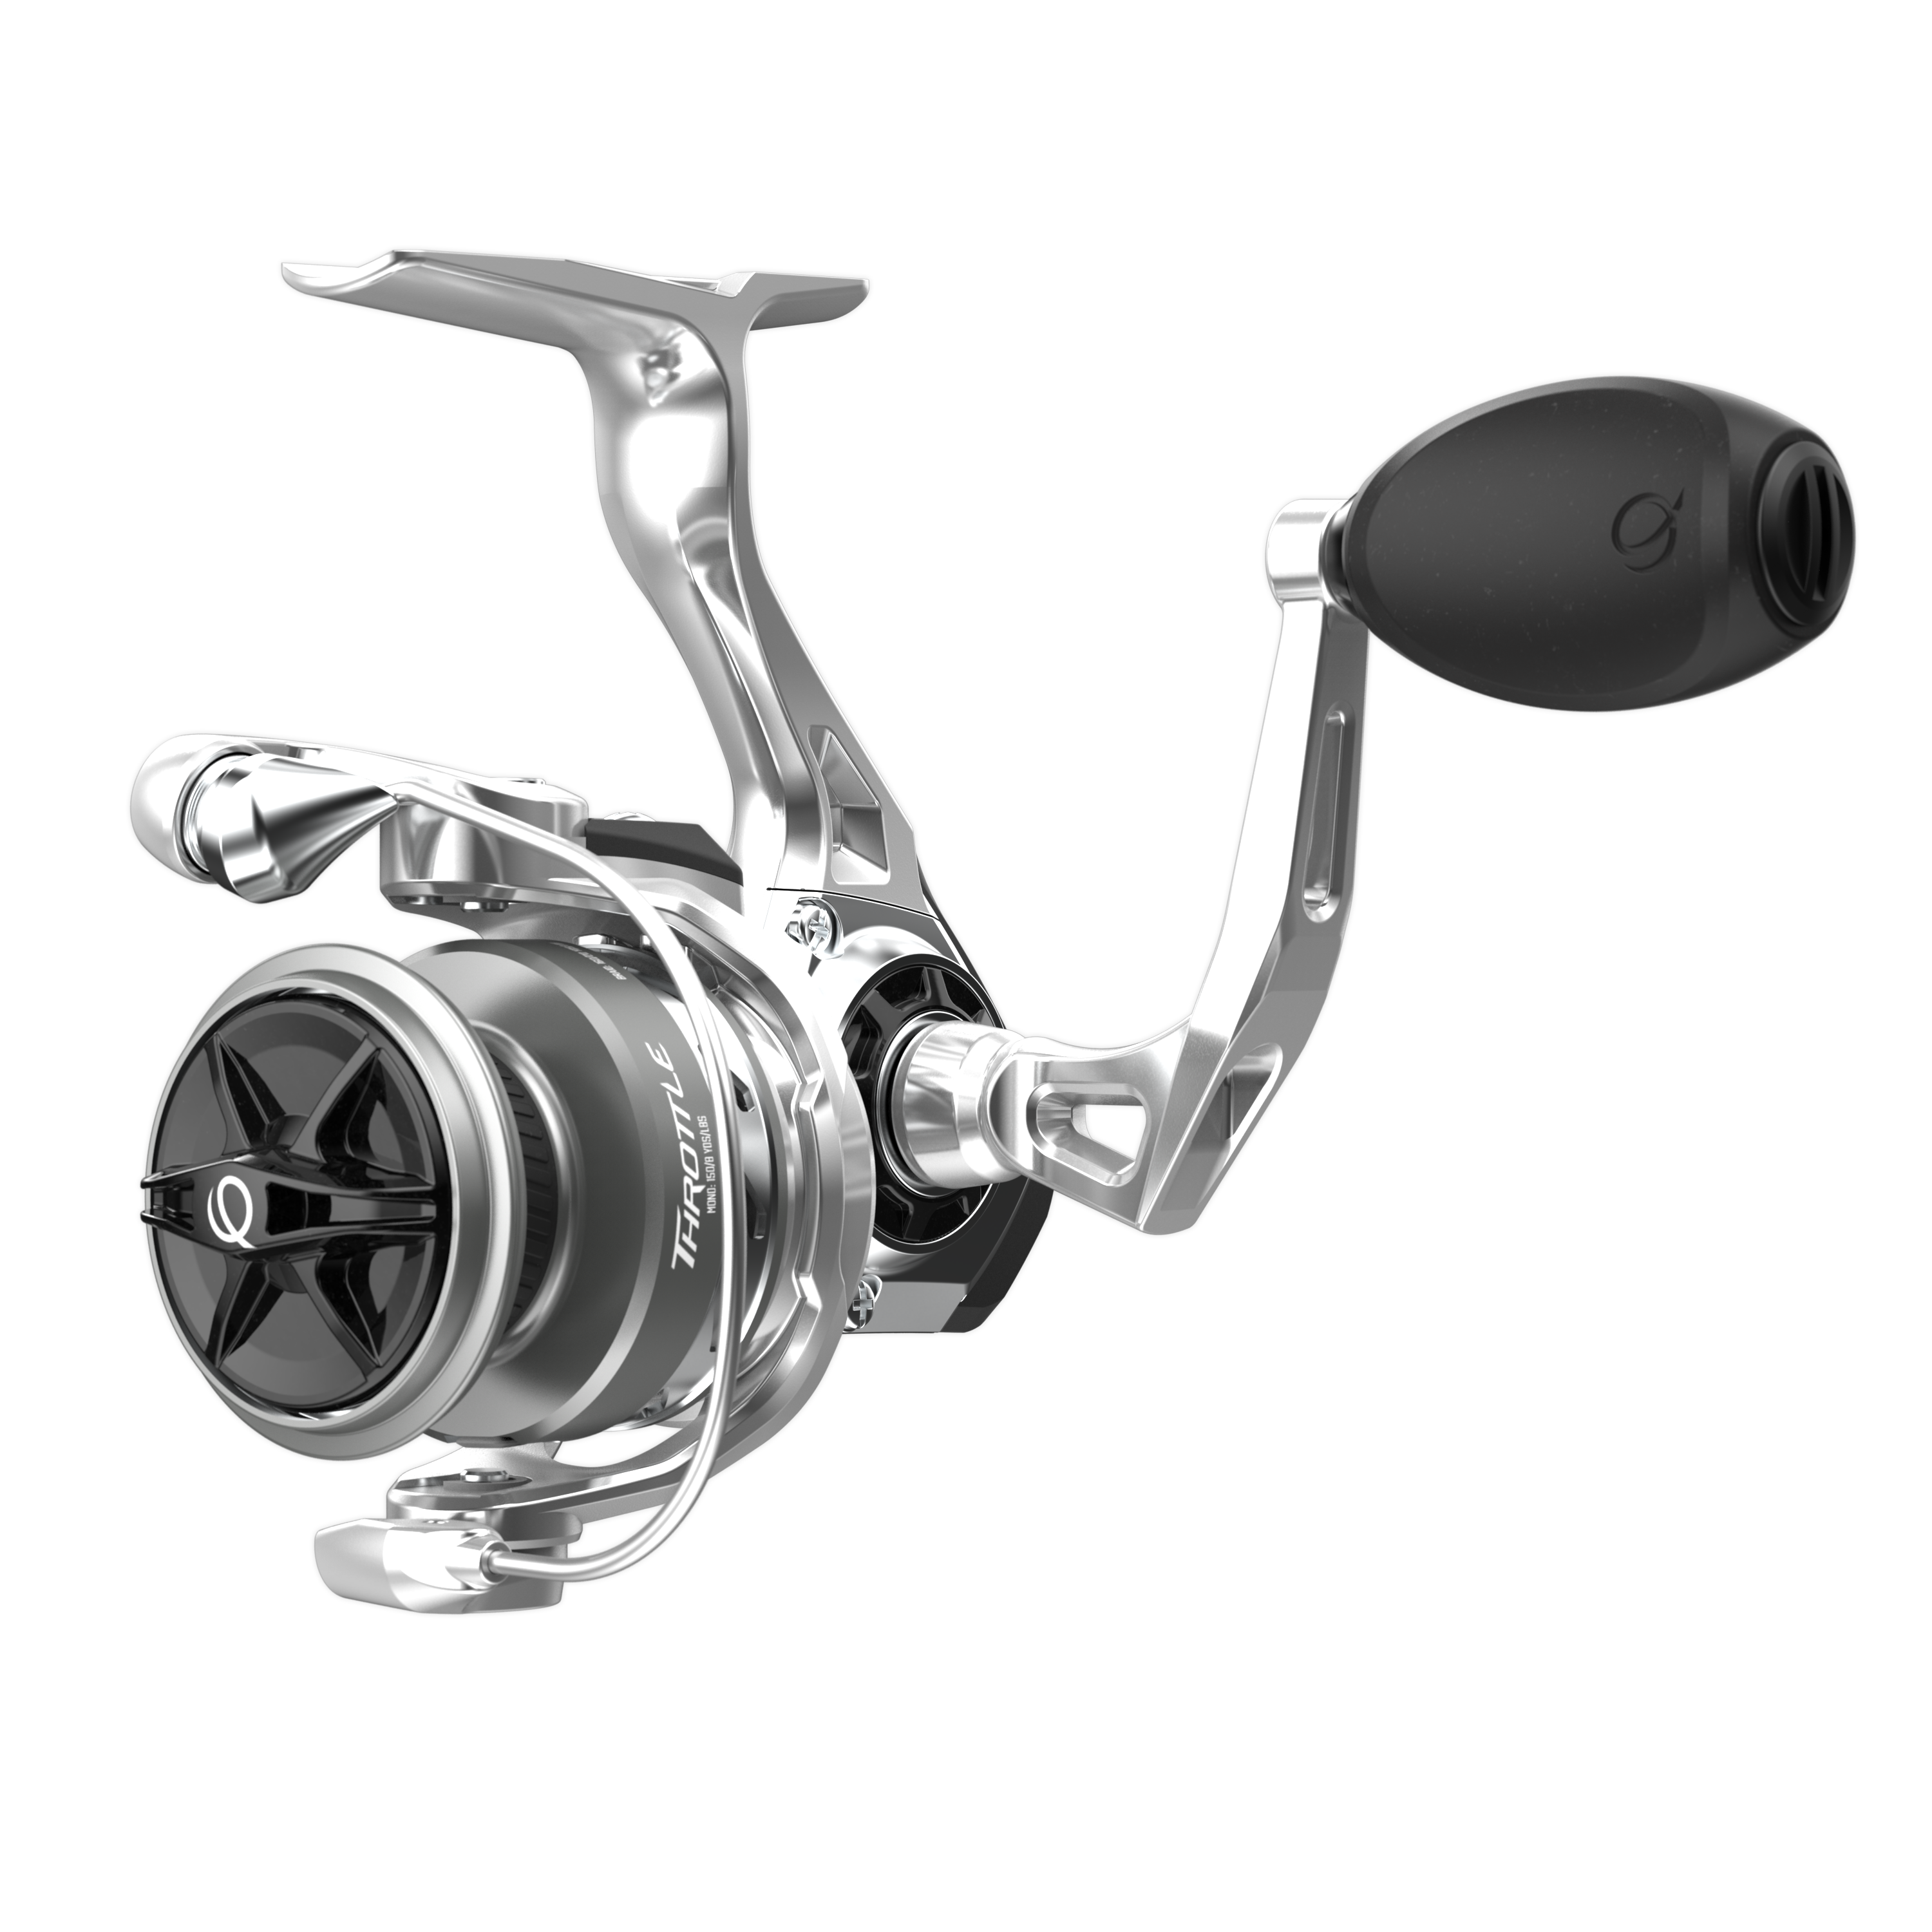 Quantum Accurist Spinning Rod and Reel Combo